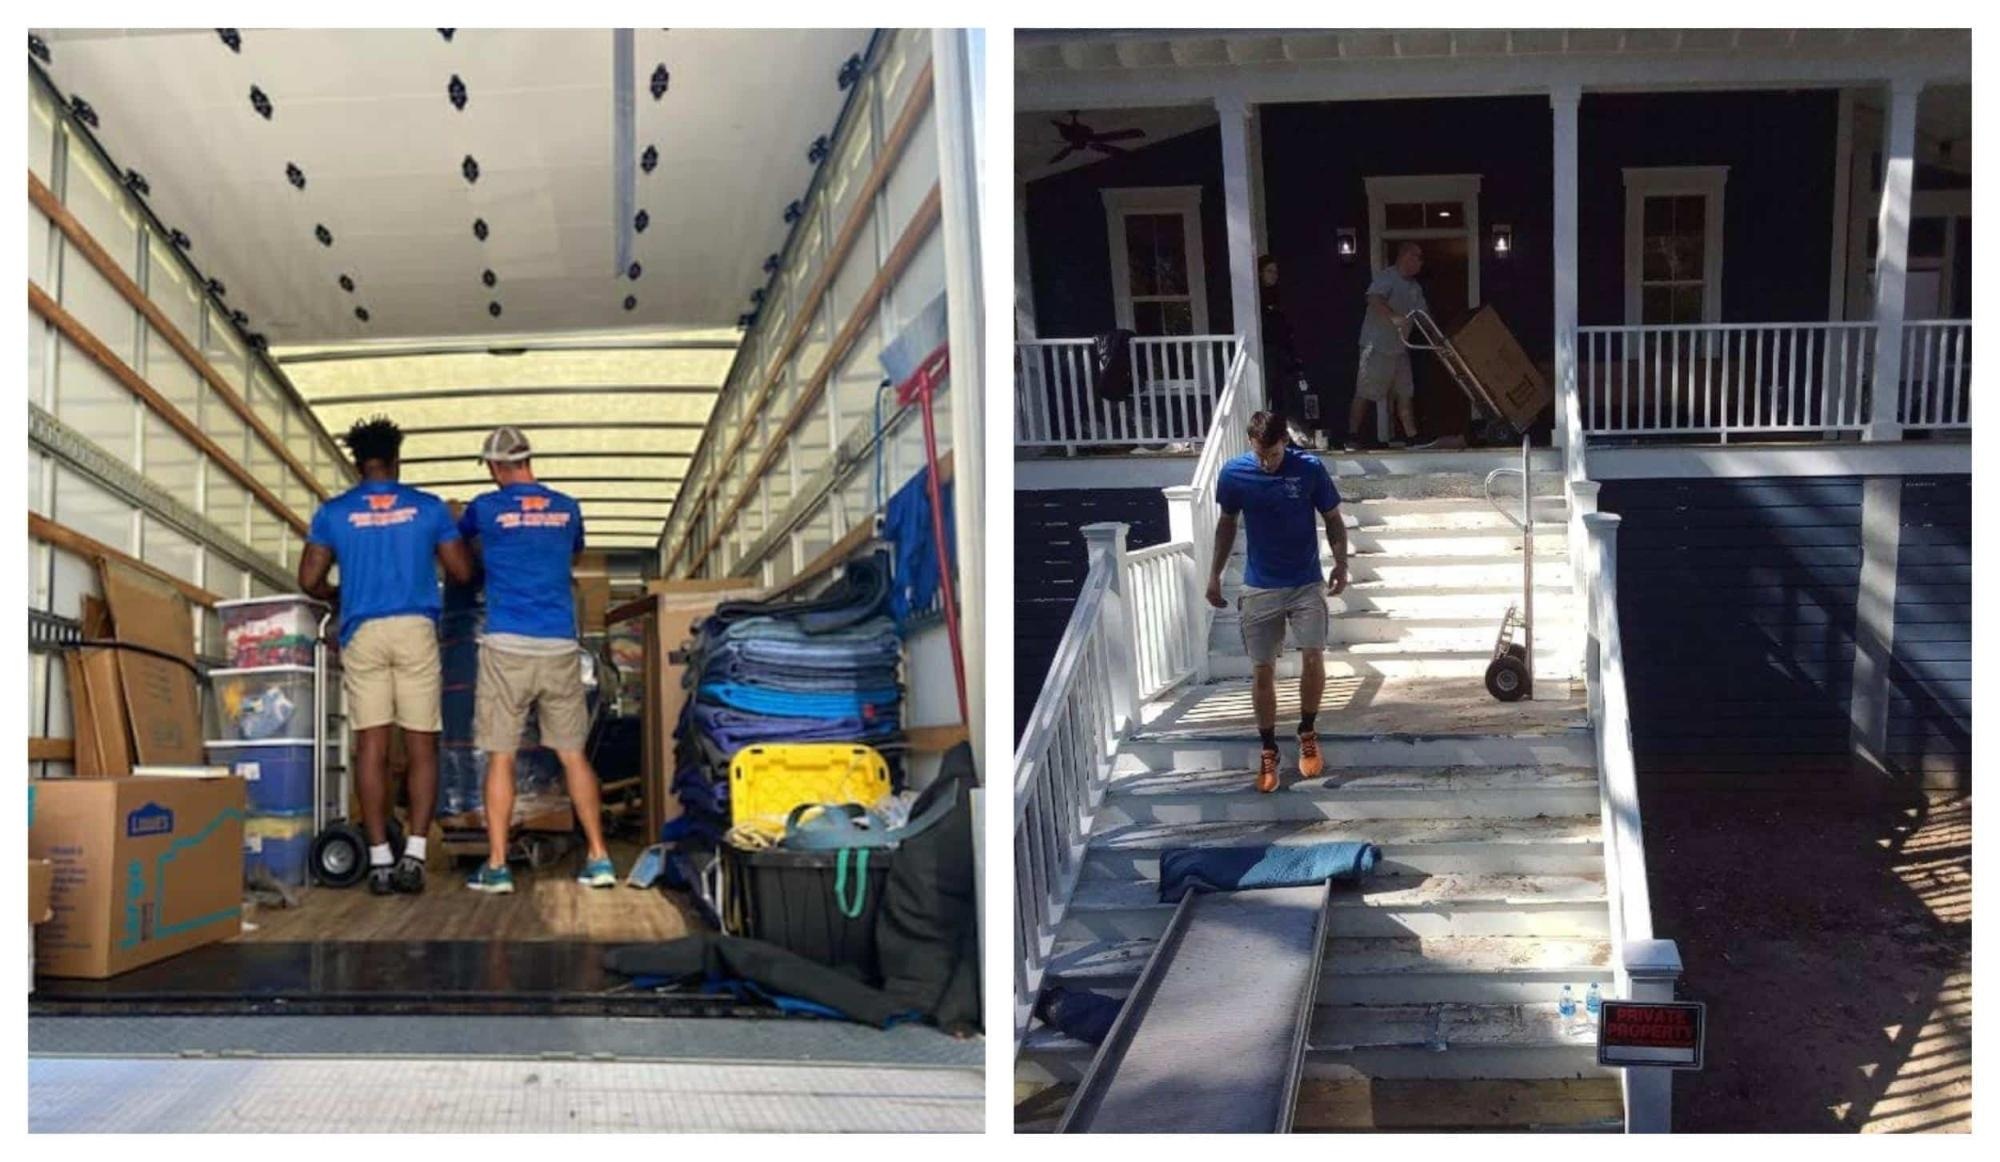 Professional Commercial Movers specializing in Sangaree, SC area